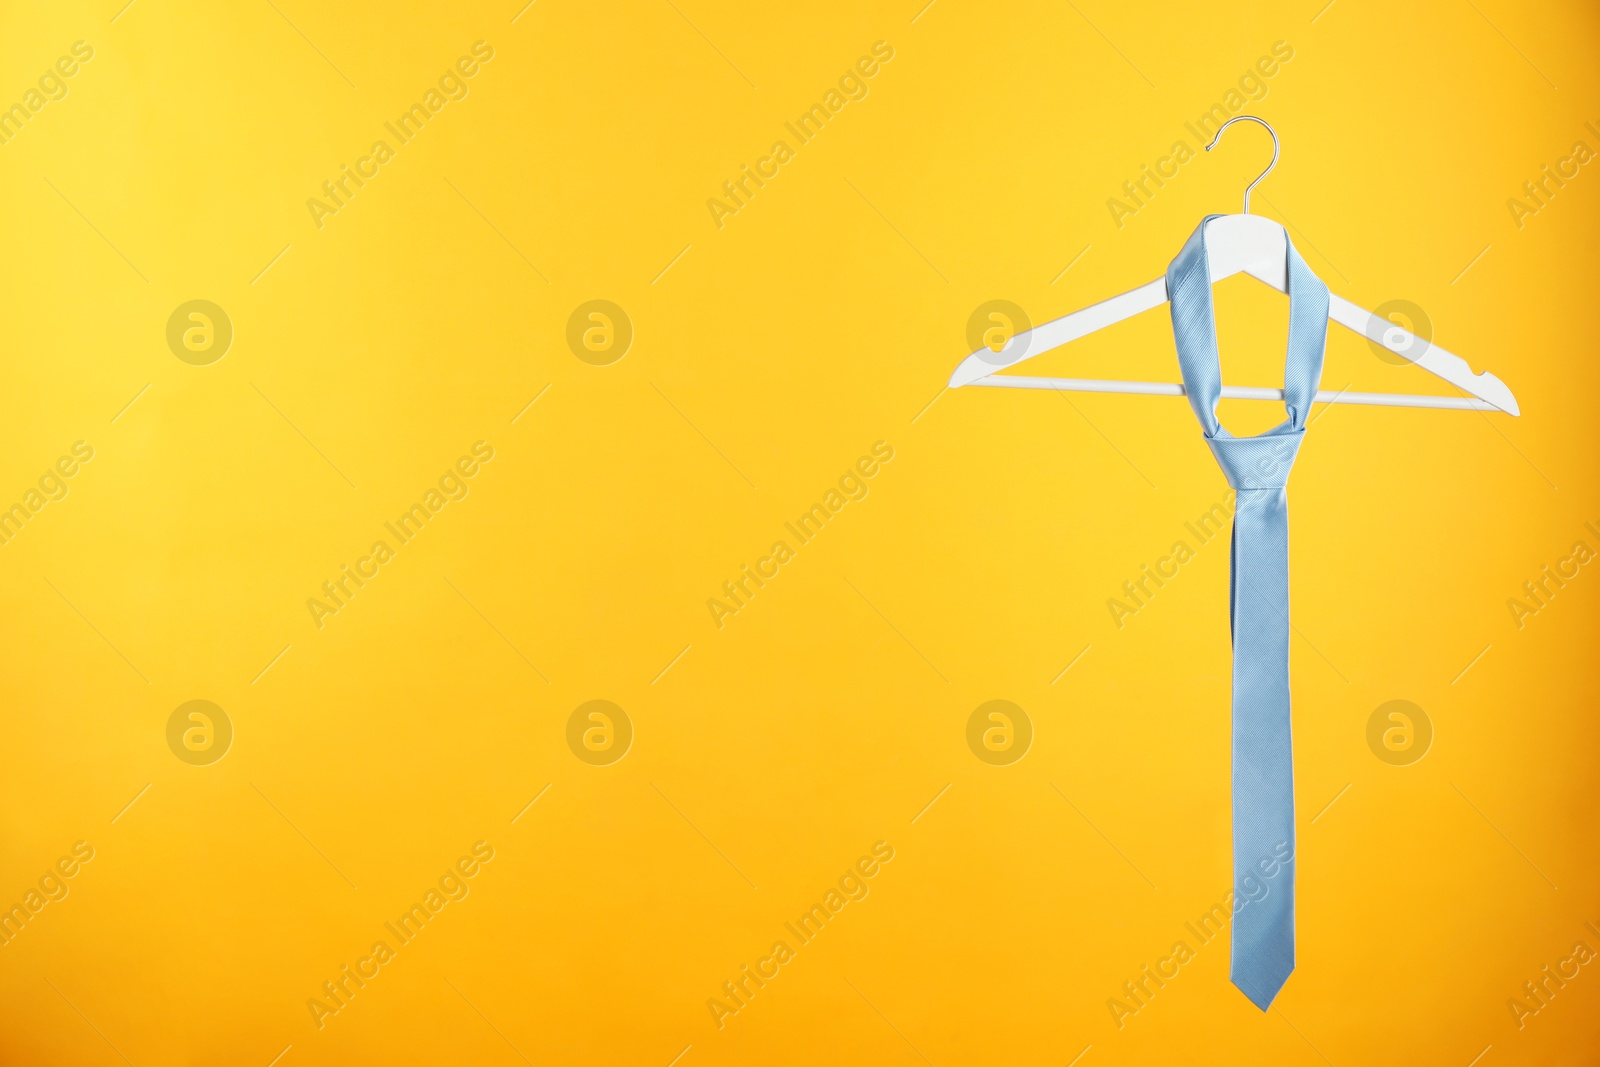 Photo of Hanger with light blue tie against orange background. Space for text